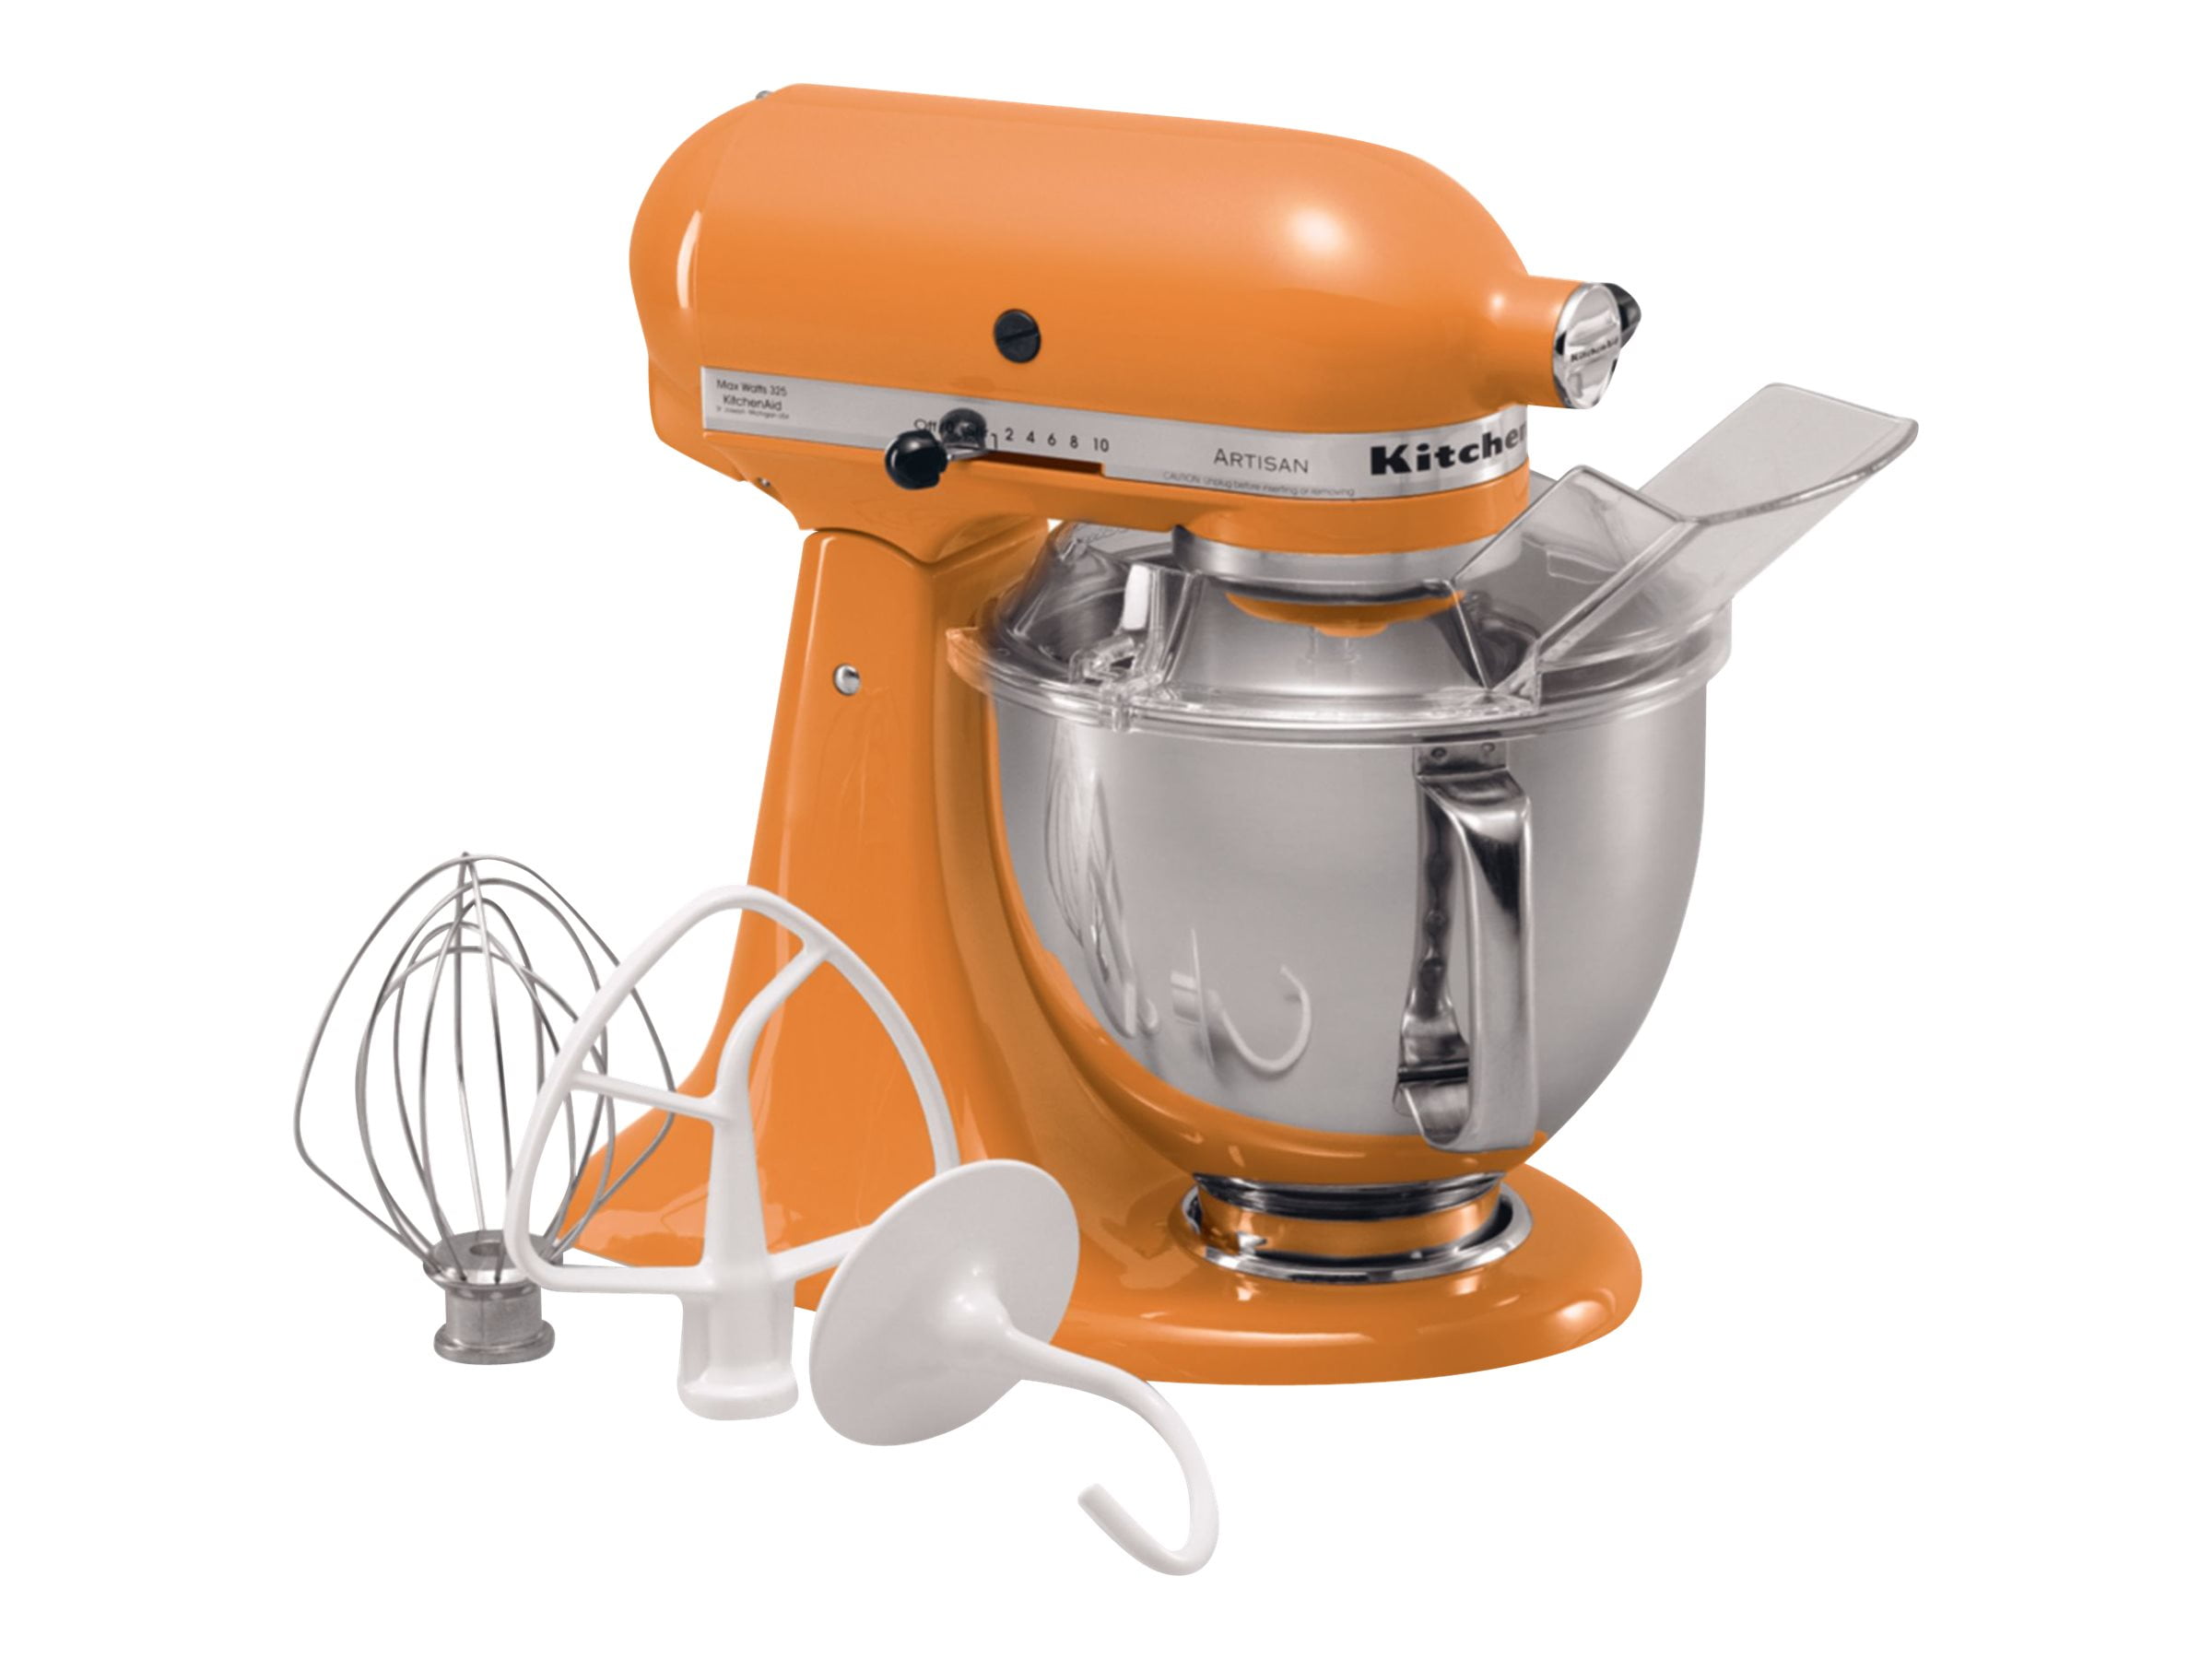 KitchenAid 5qt Artisan Mixer Set In Tangerine for Sale in Fountain